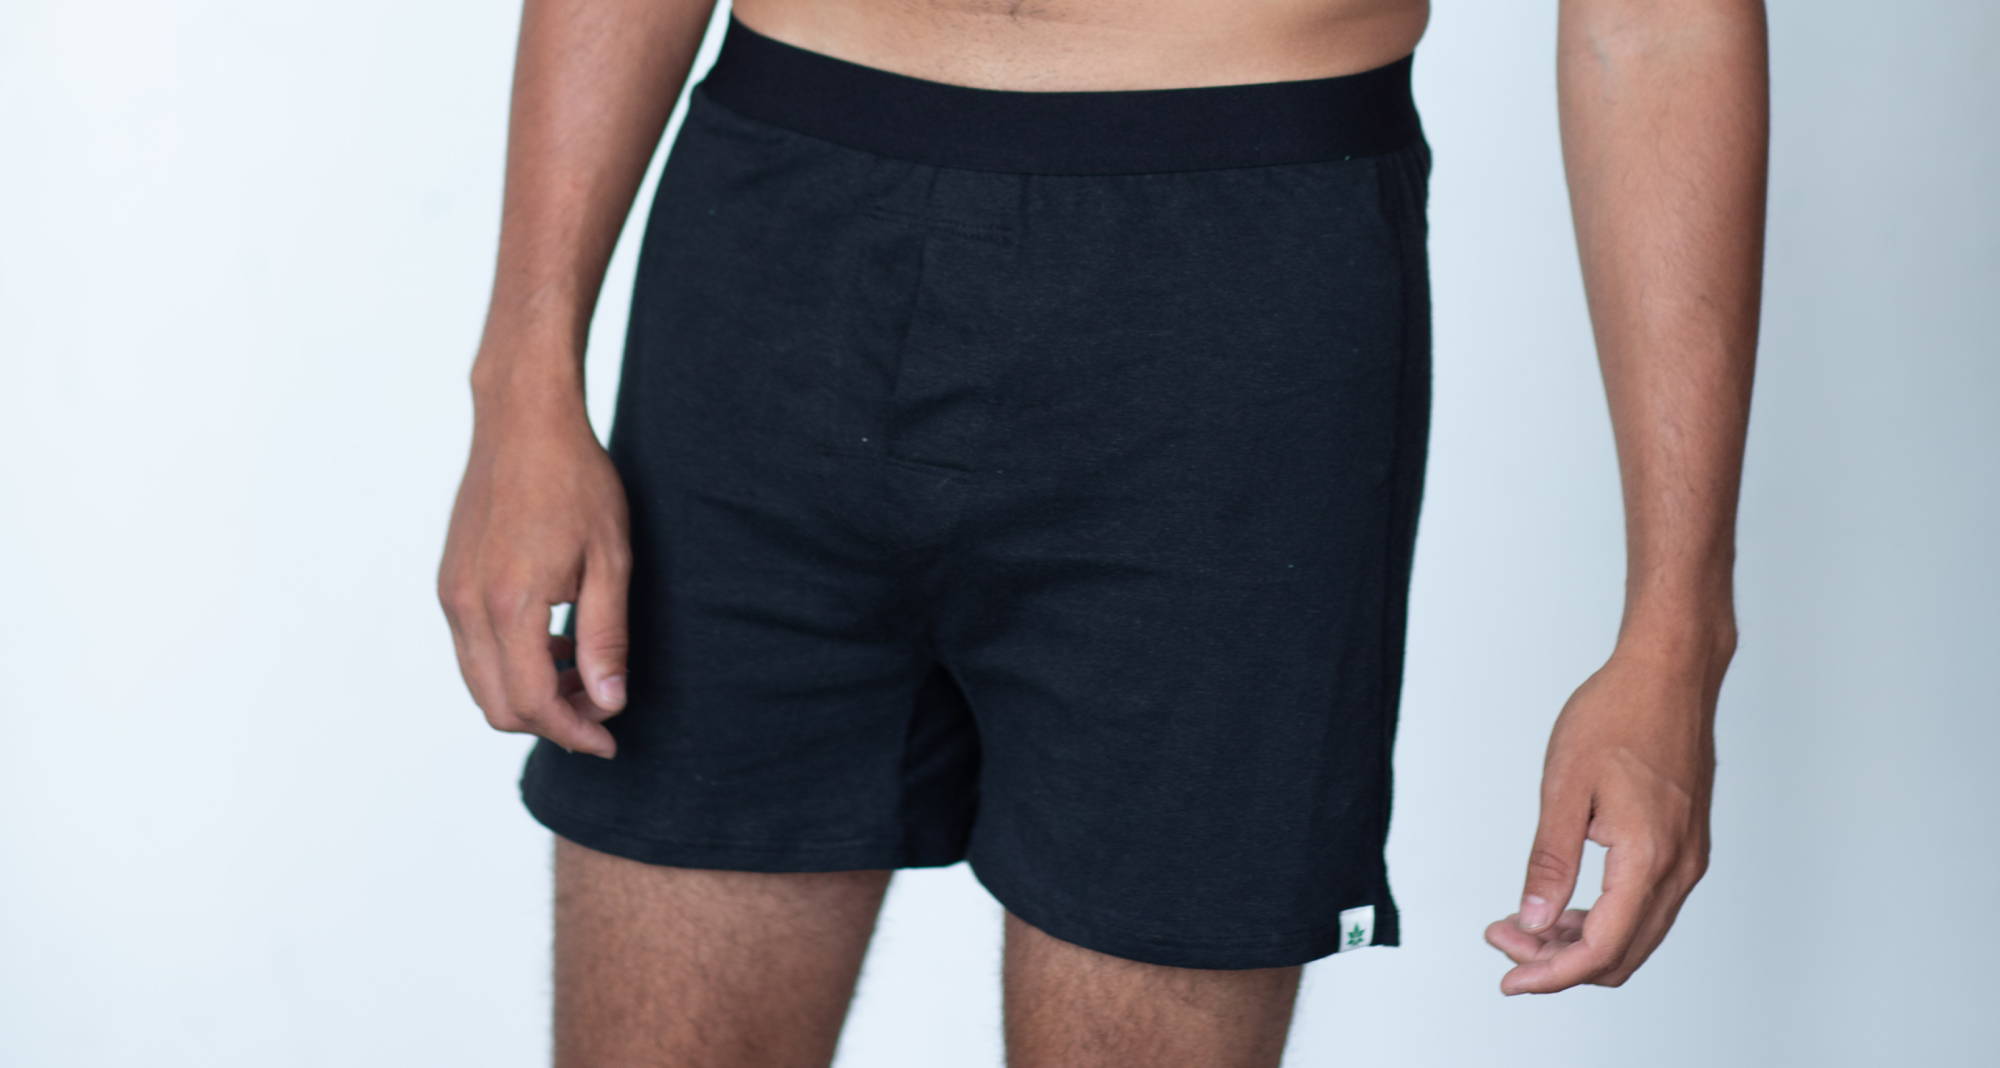 man wearing black boxers against a white background